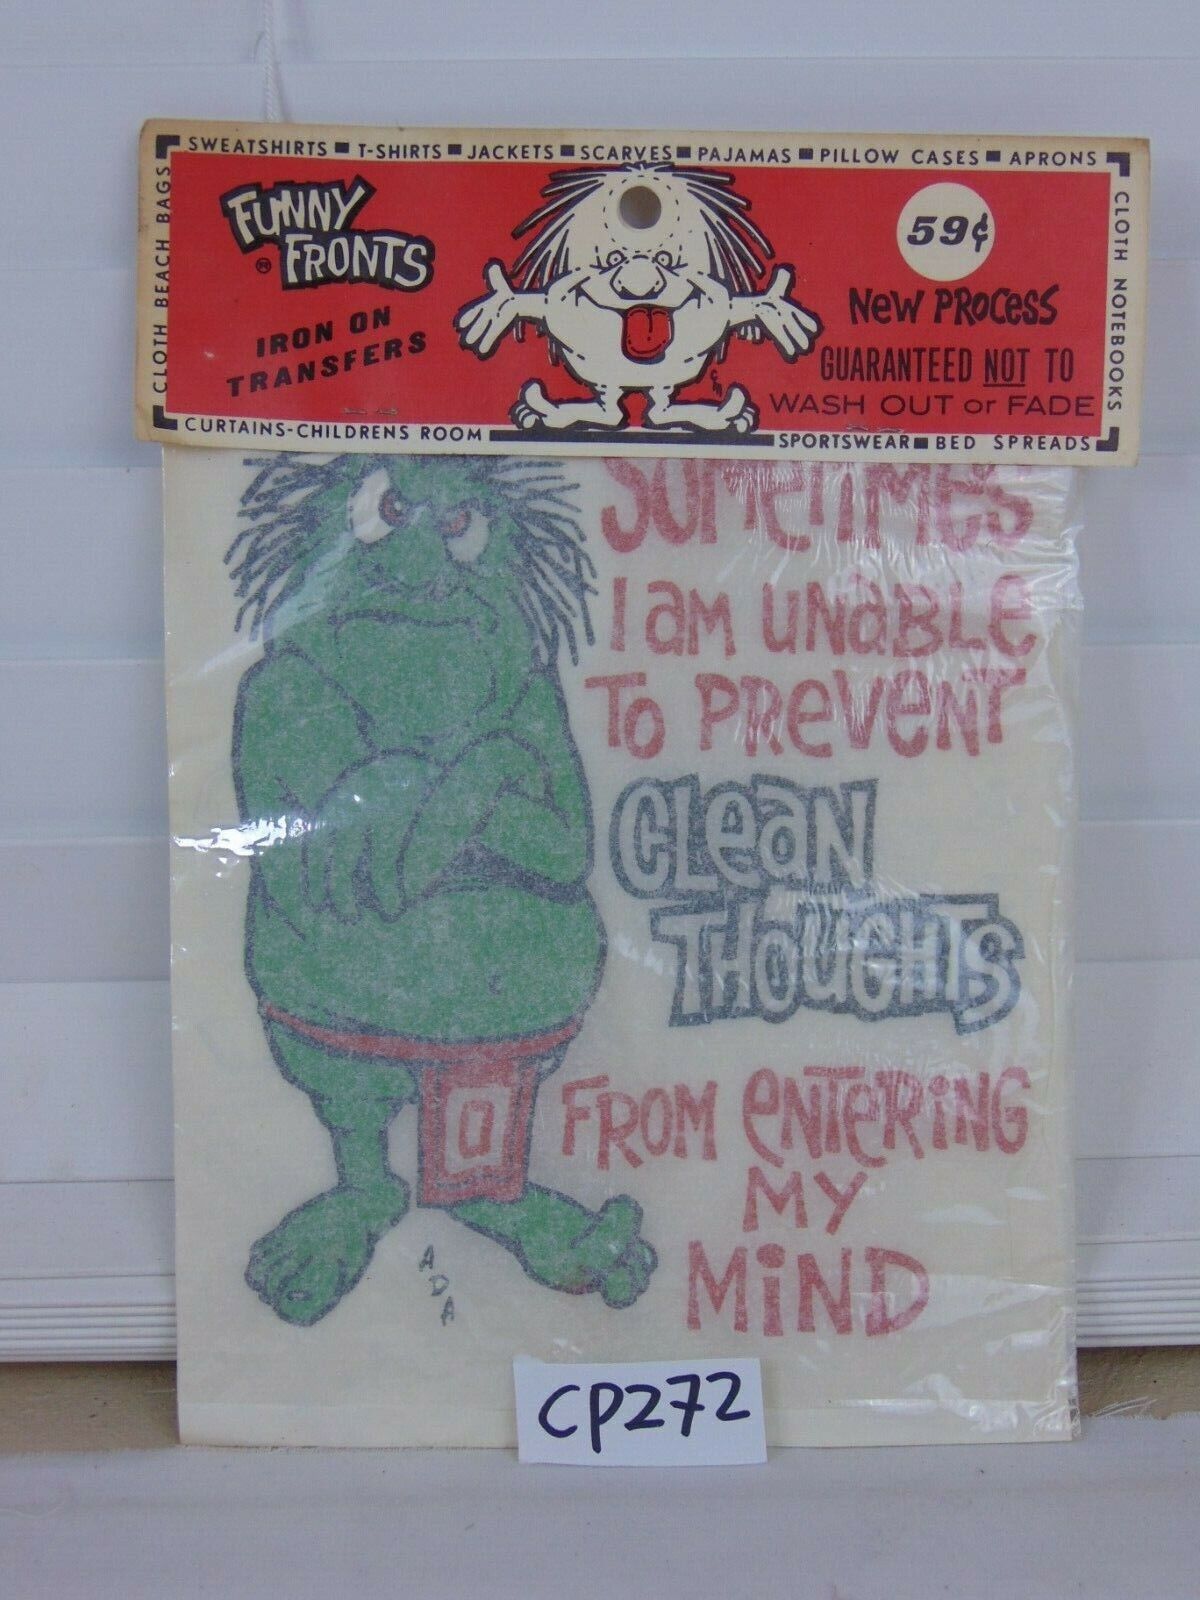 VINTAGE FUNNY FRONTS IRON ON TRANSFER-SOMETIMES UNABLE TO PREVENT CLEAN THOUGHTS